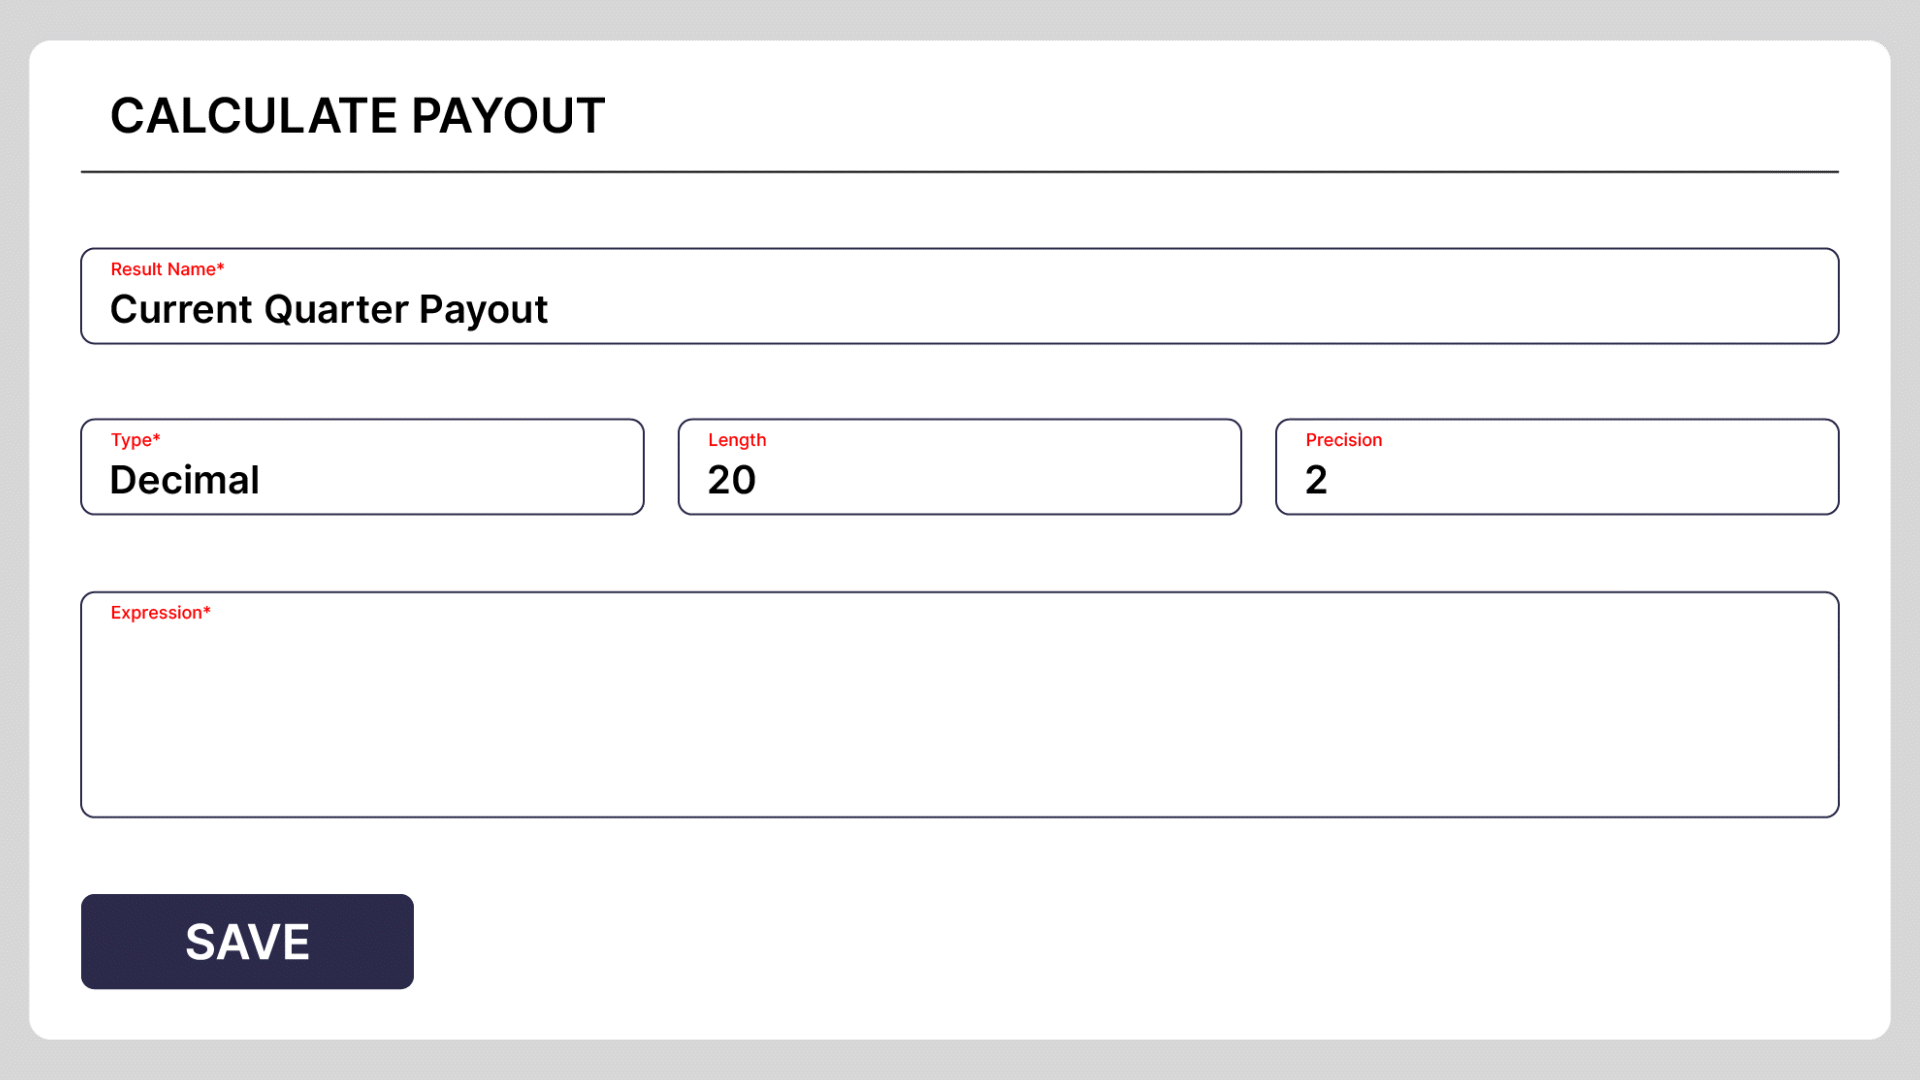 Calculate payout